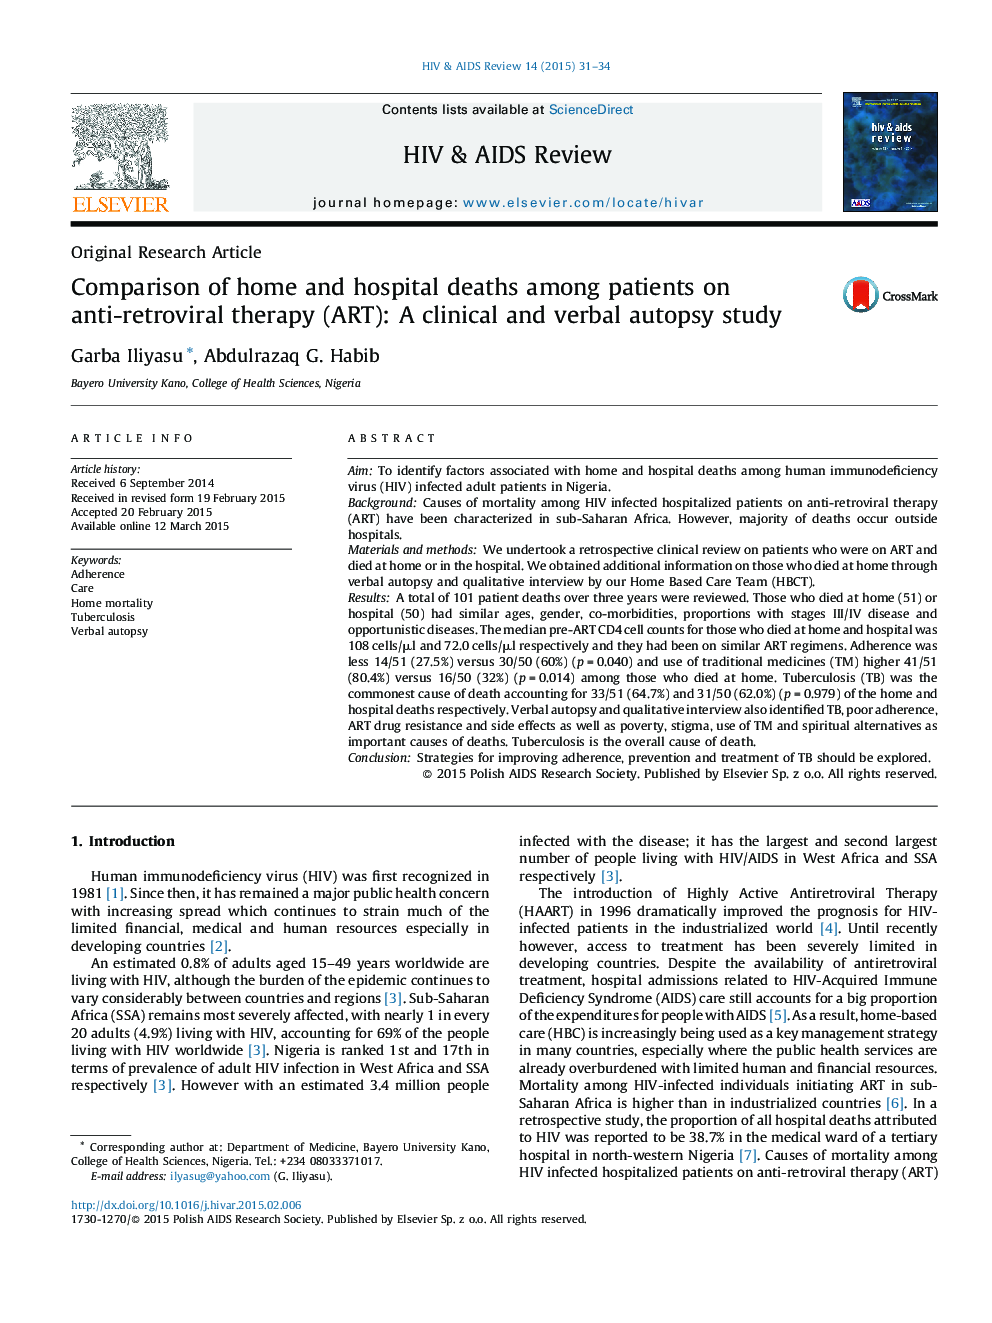 Comparison of home and hospital deaths among patients on anti-retroviral therapy (ART): A clinical and verbal autopsy study